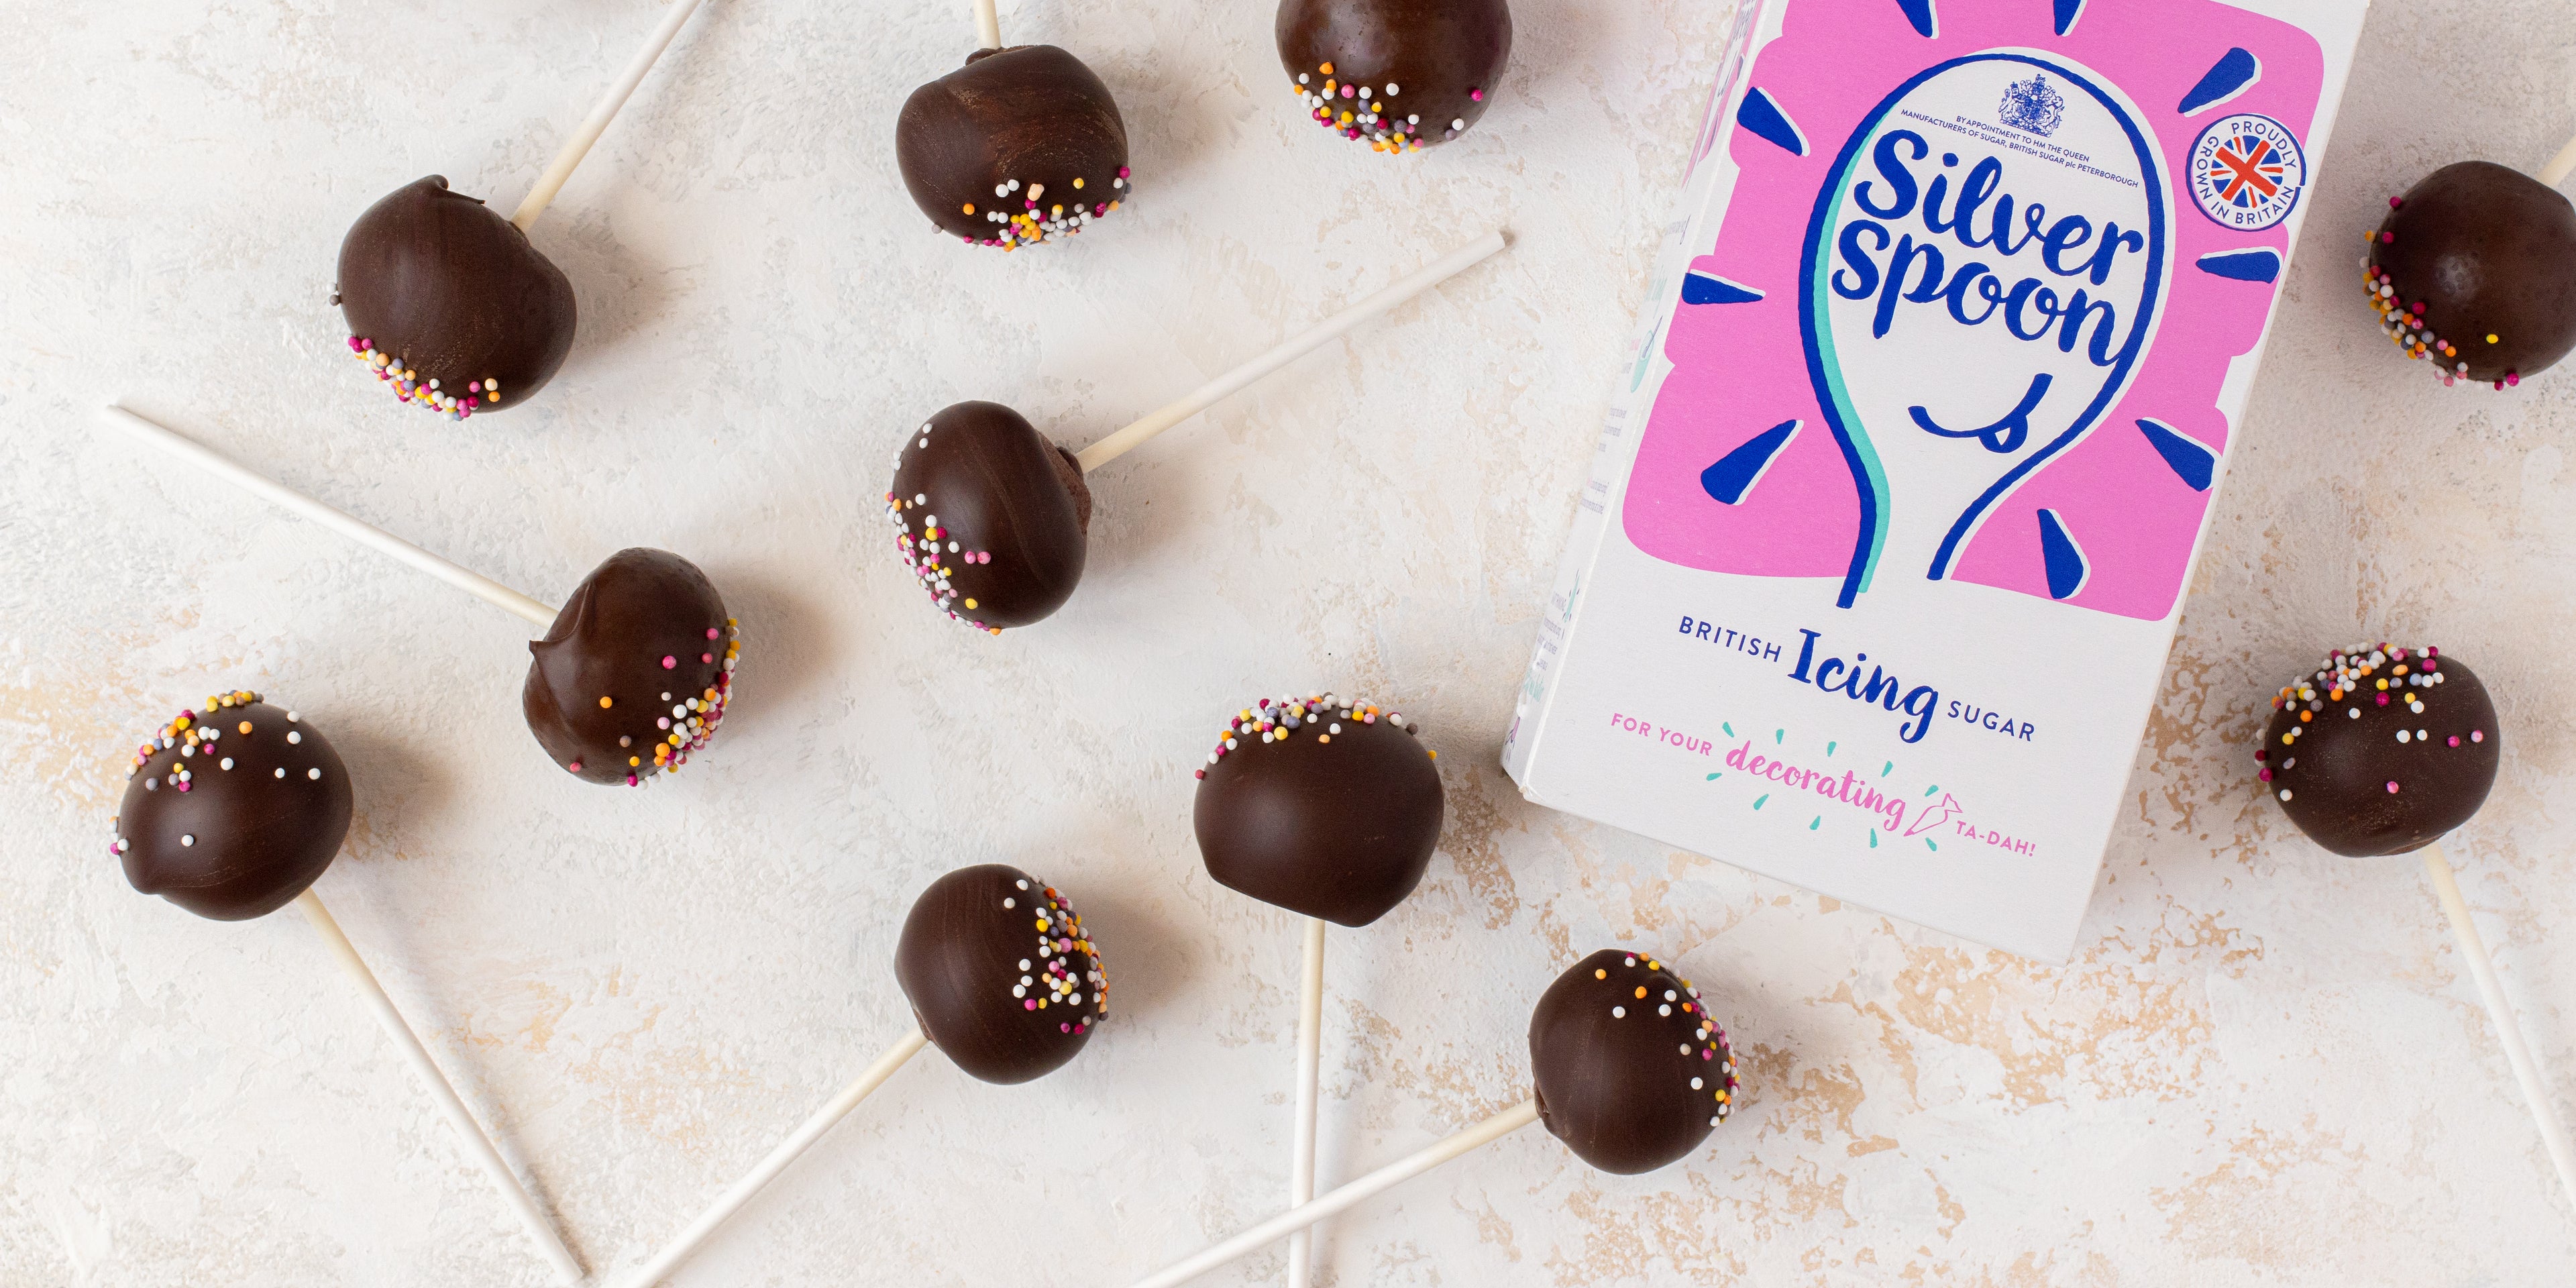 Top view of Chocolate Cake Pops scattered around a box of Silver Spoon Icing sugar